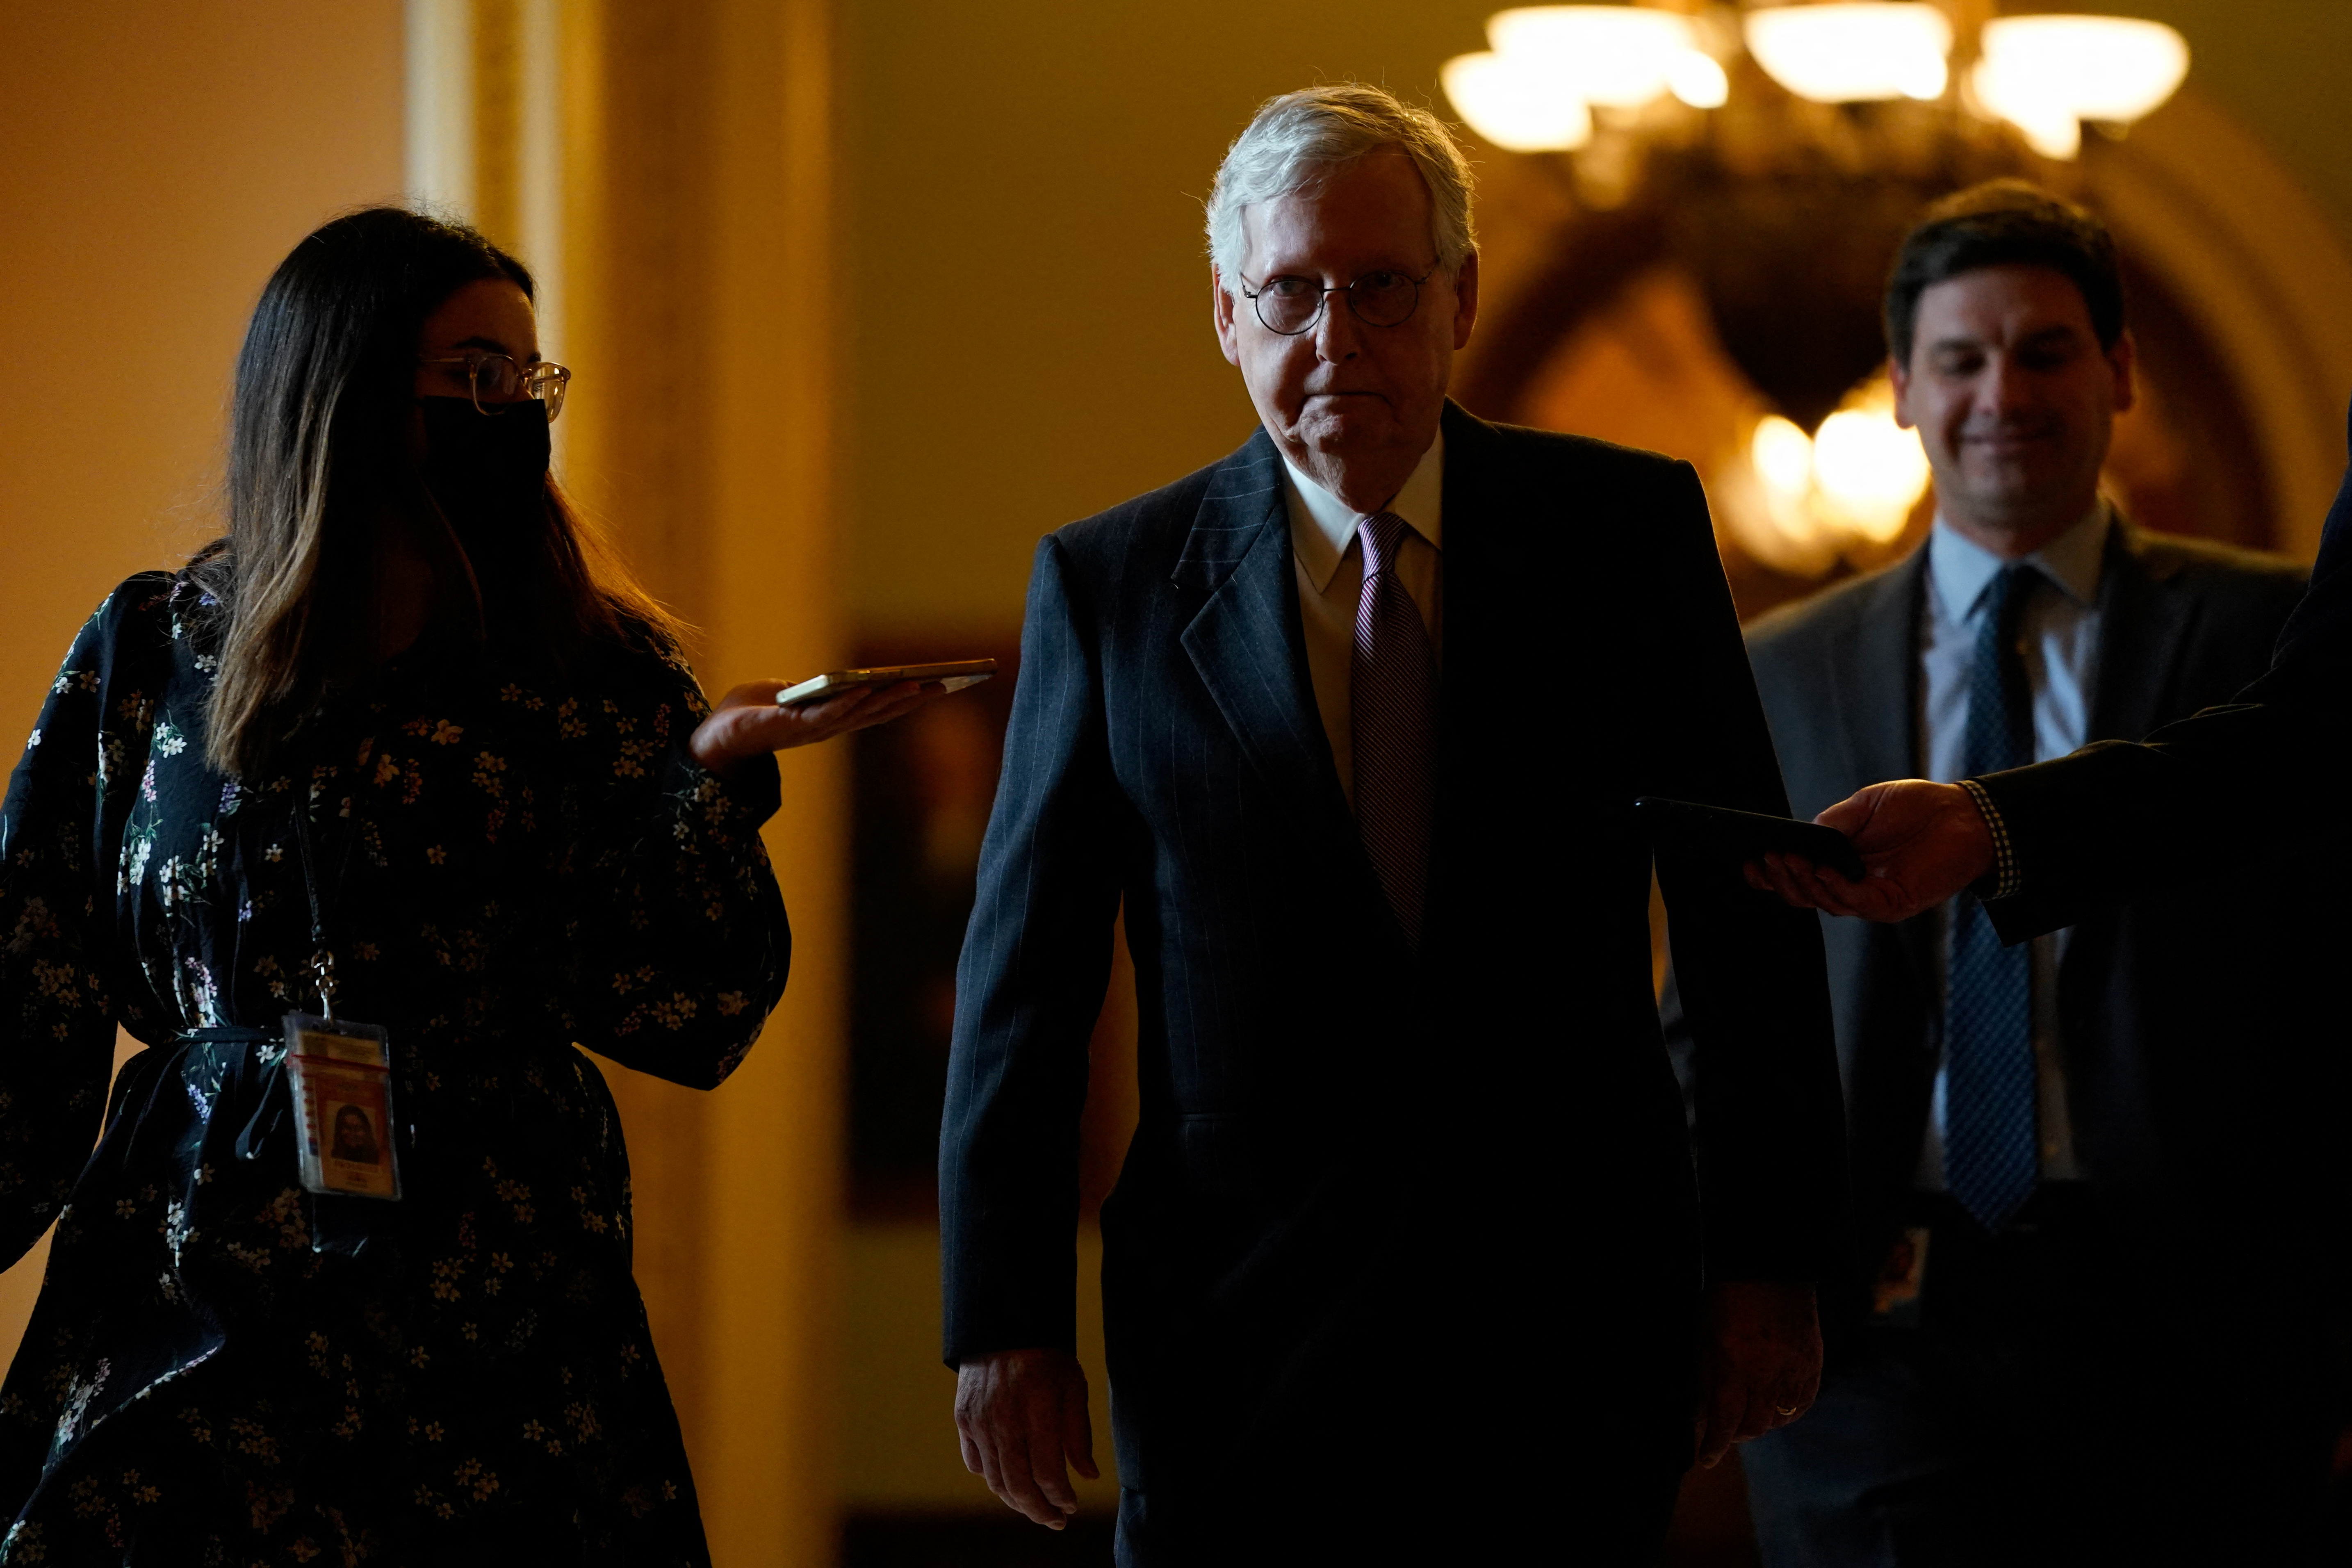 U.S. Senate Minority Leader Mitch McConnell walks from the Senate chamber to his office at the U.S. Capitol in Washington